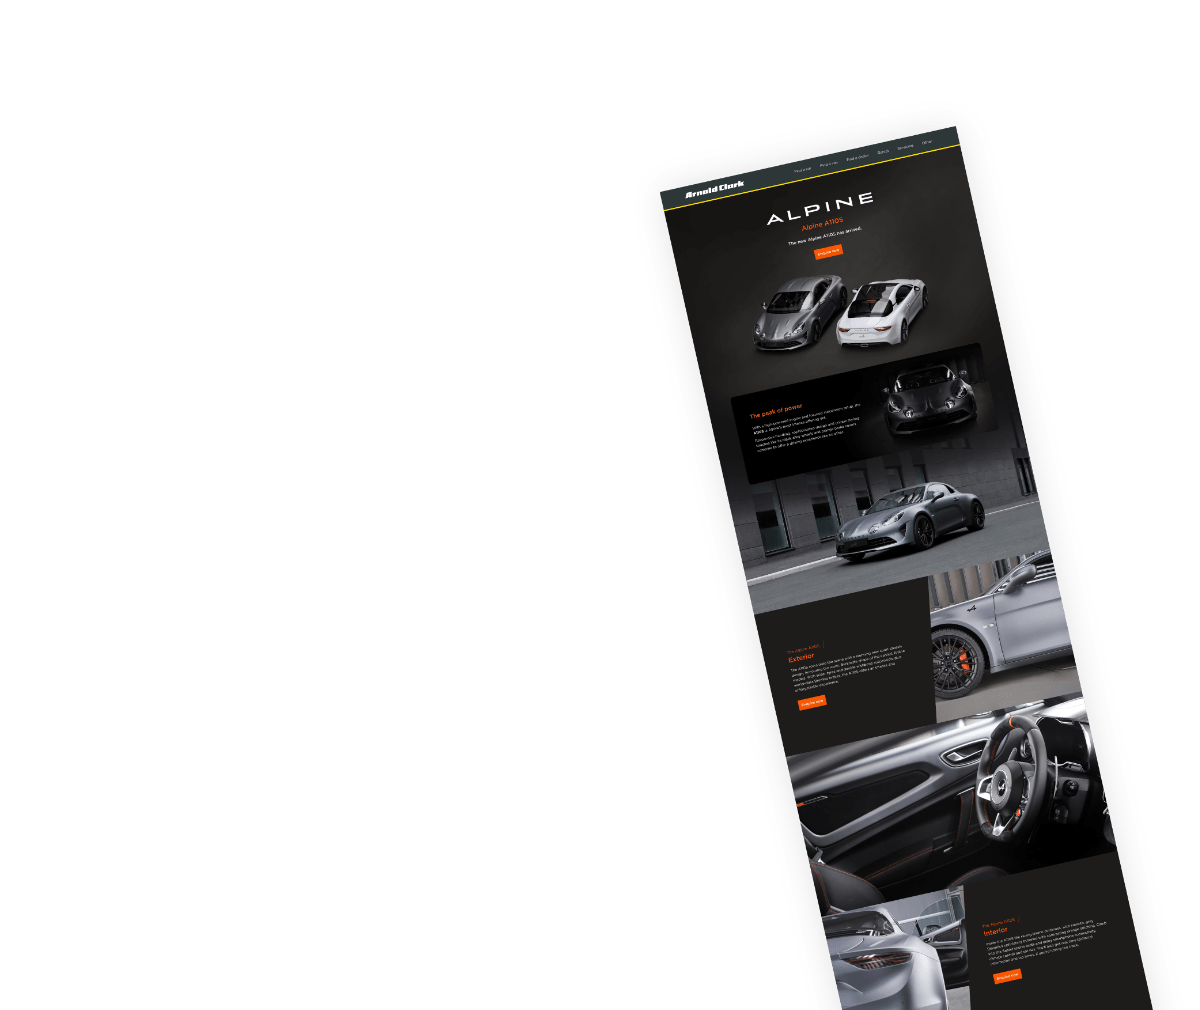 Alpine landing page for the A110 model